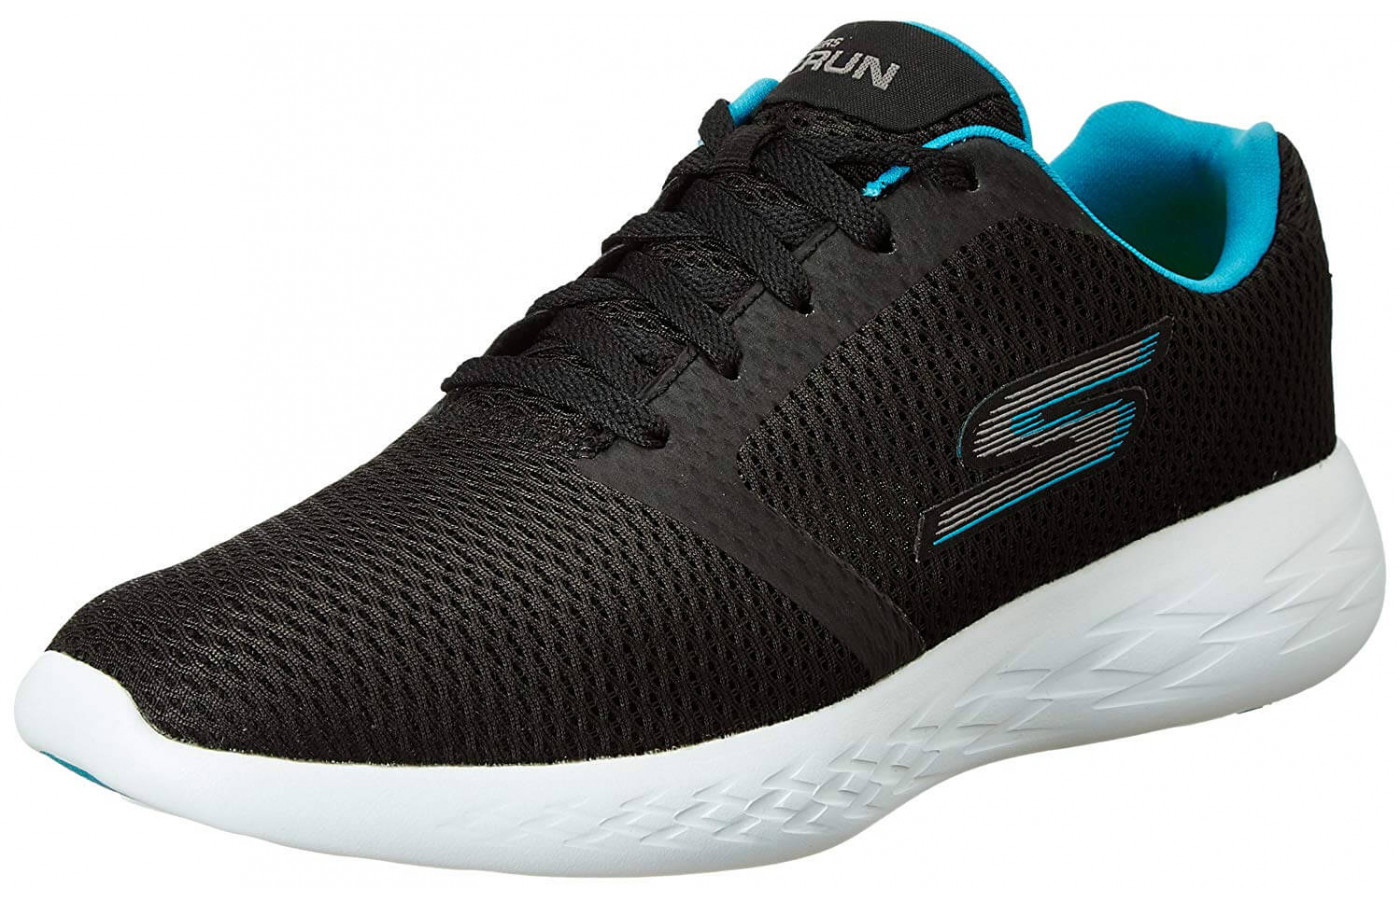 Sketchers GOrun 600 Refine featured image side angle view